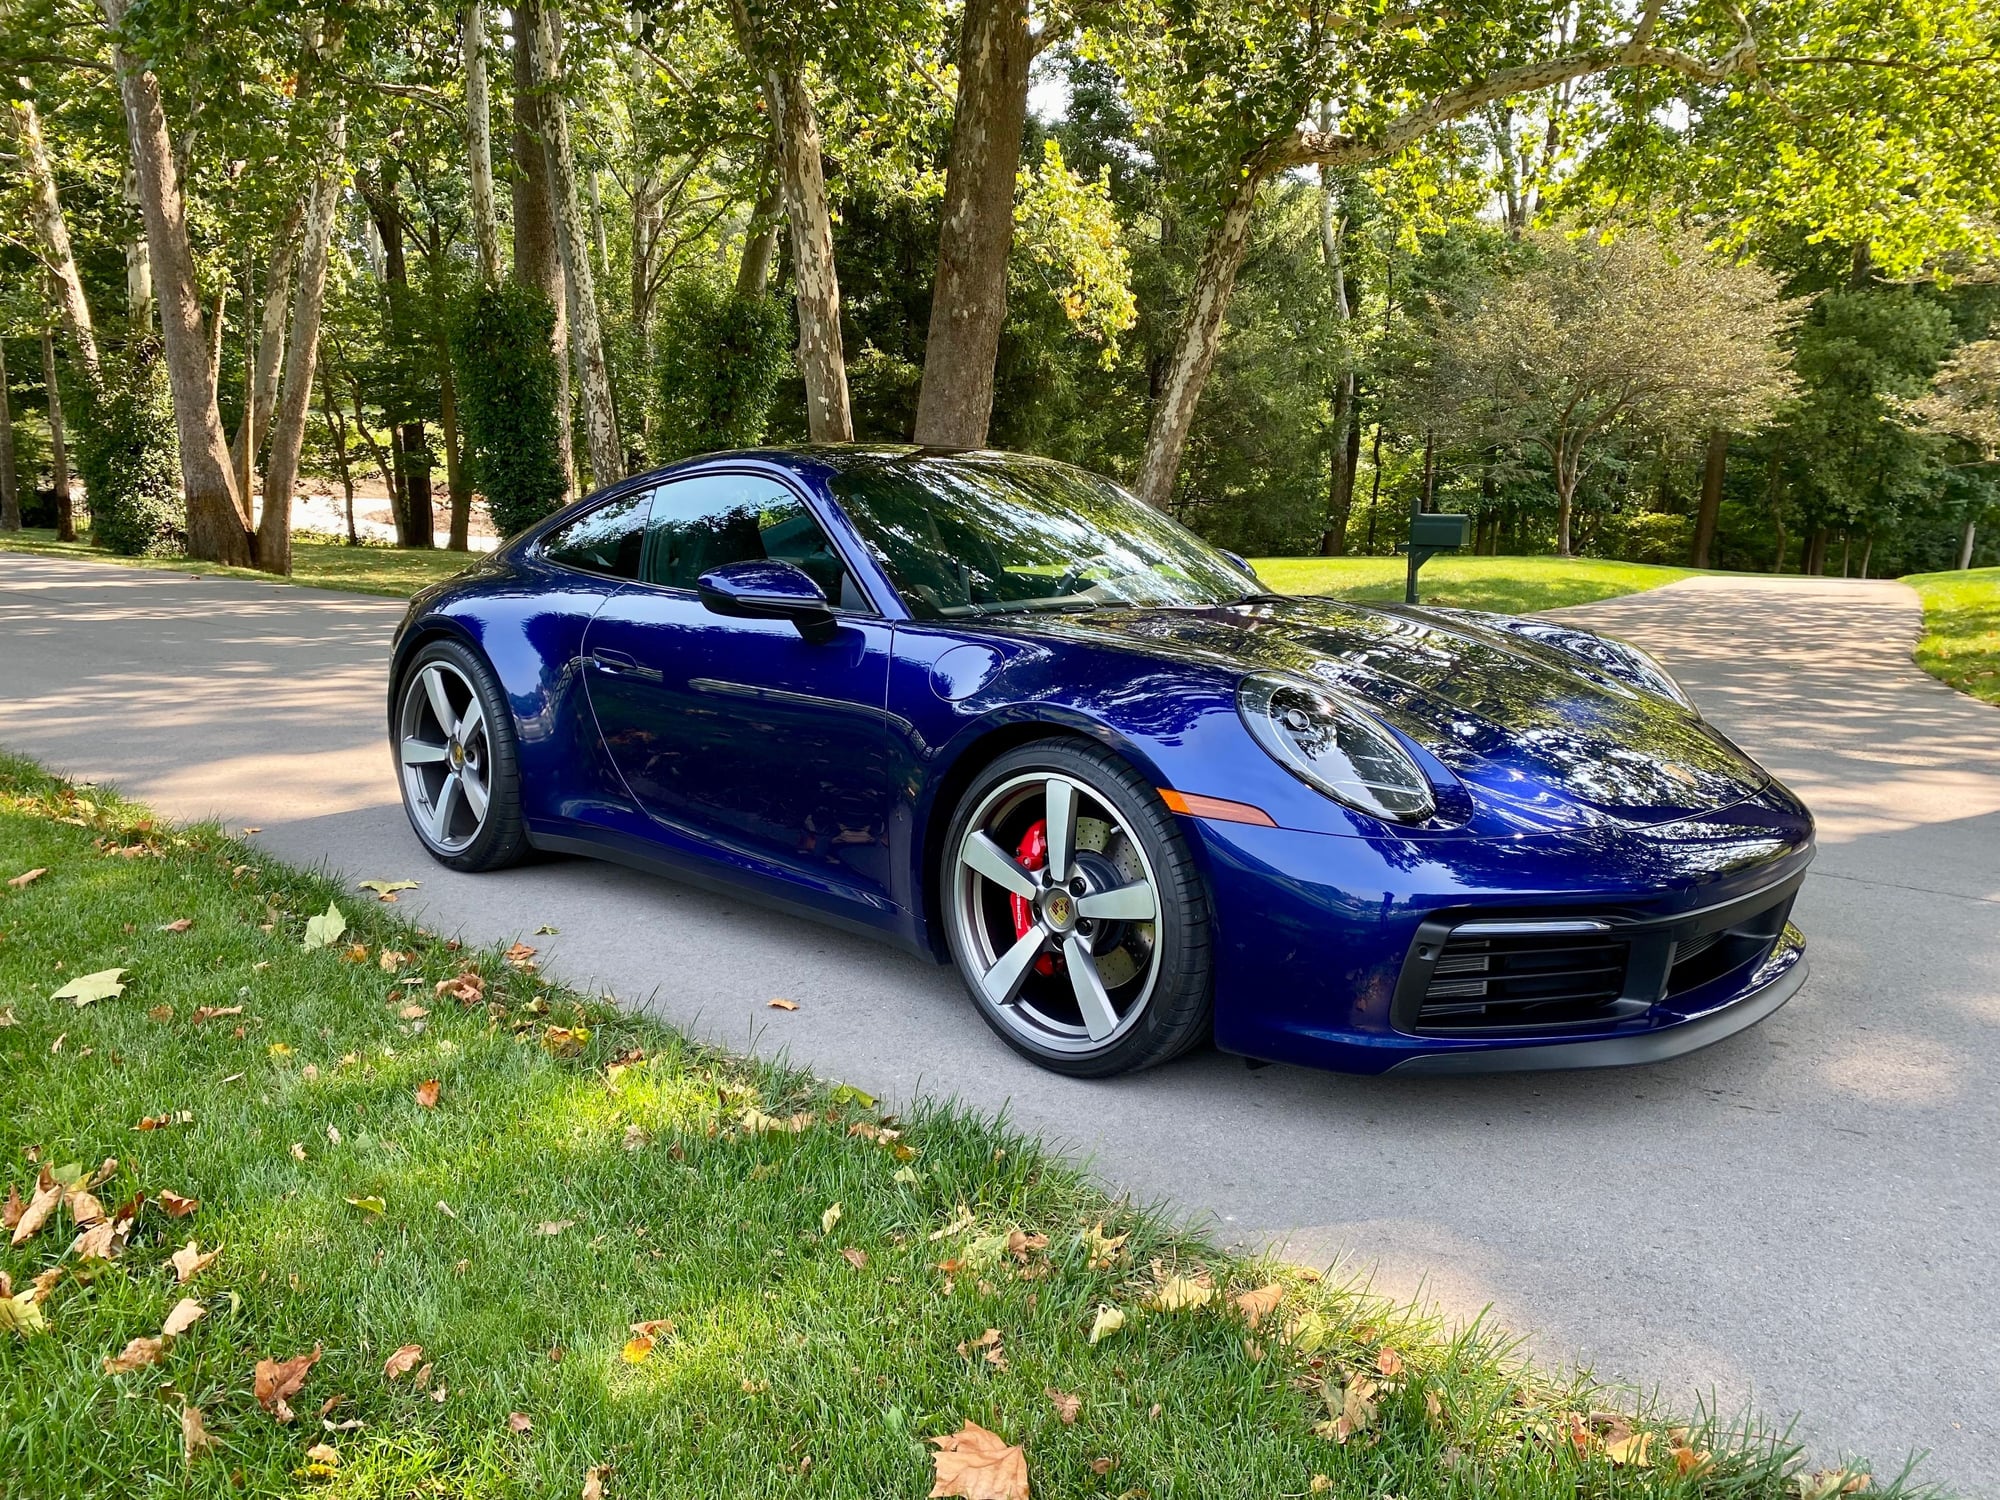 2020 Porsche 911 - 2020 Gentian Blue Carrera S - Used - VIN WP0AB2A93LS227733 - 8,450 Miles - 6 cyl - 2WD - Automatic - Coupe - Blue - Indianapolis, IN 46220, United States